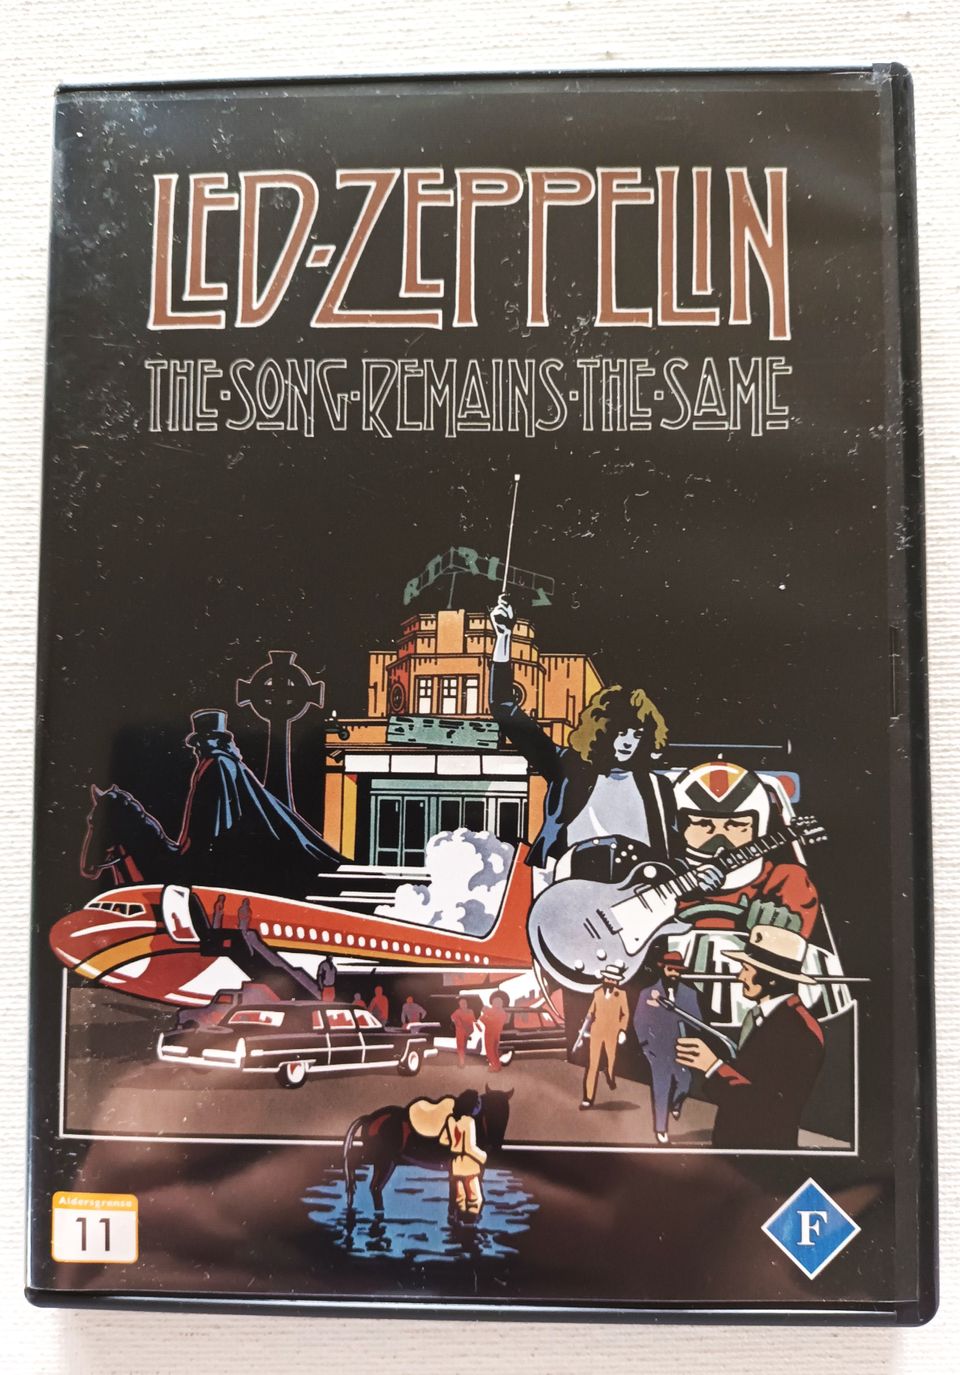 Led Zeppelin-The Song Remains The Same DVD